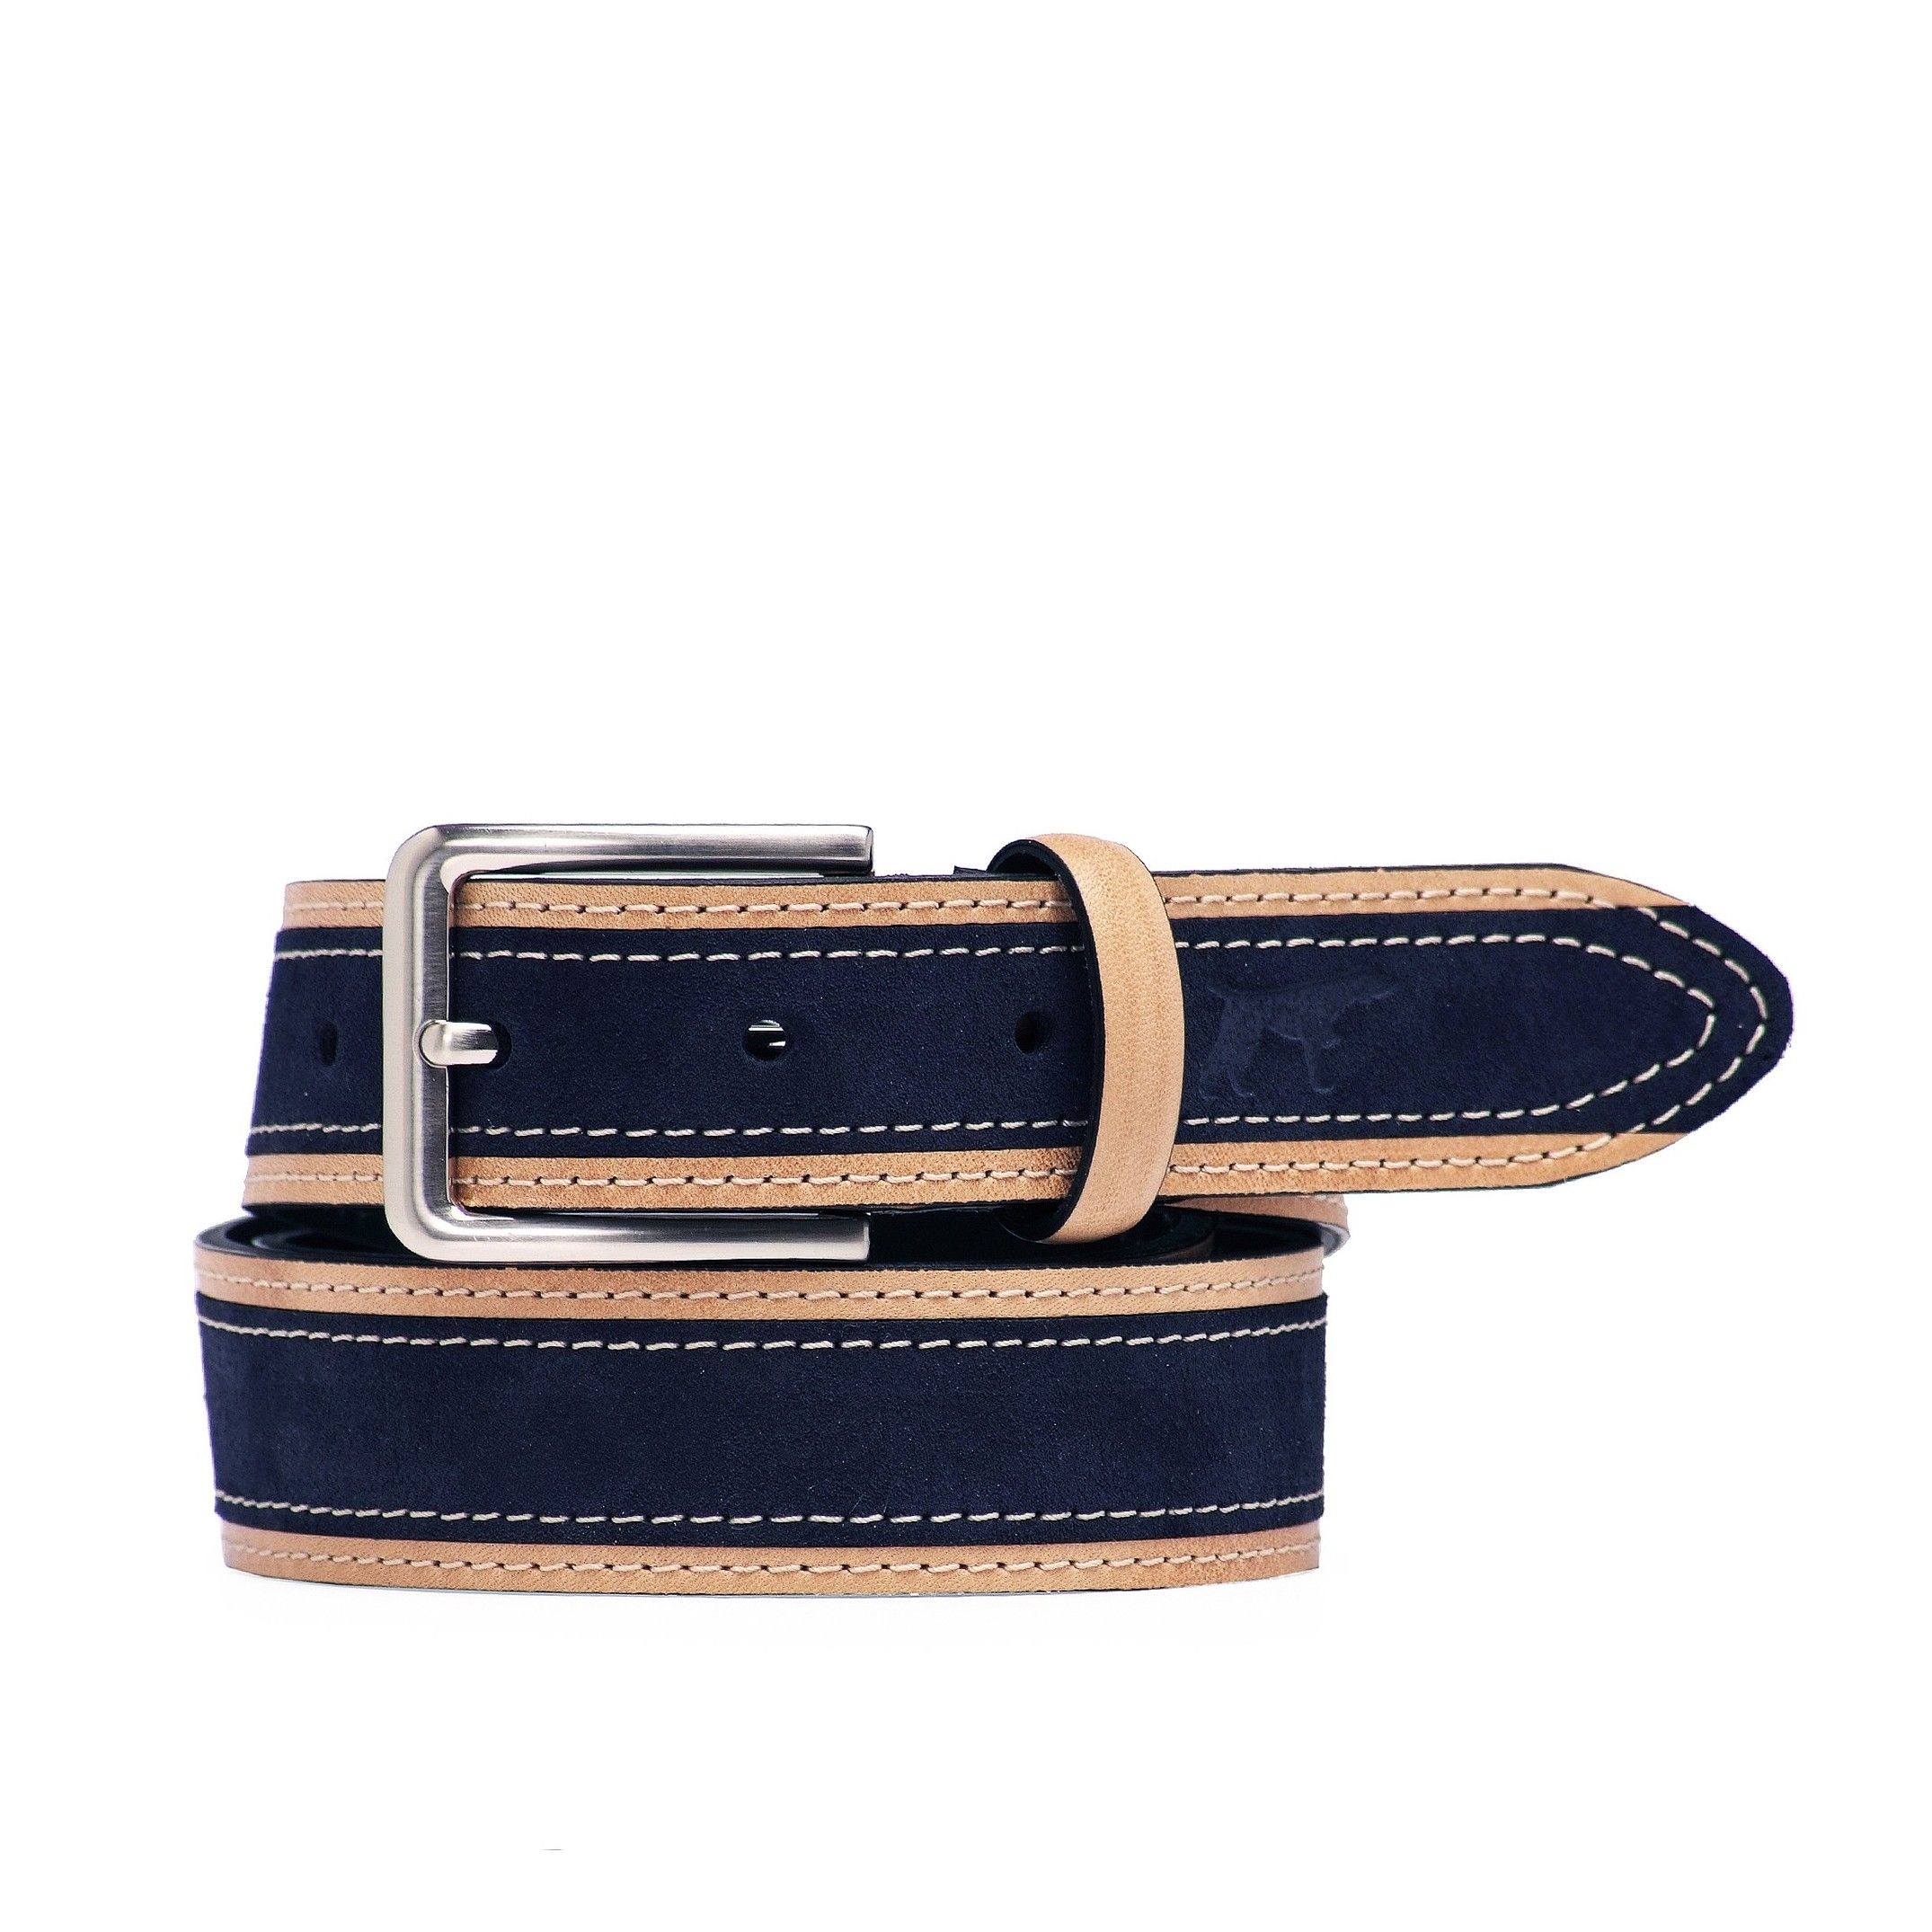 Adjustable belt. Classic leather. Removable metal buckle to adapt the belt. Width of 3,5 cm. Large of 100 cm & 115 cm. Navy color. Classic style.